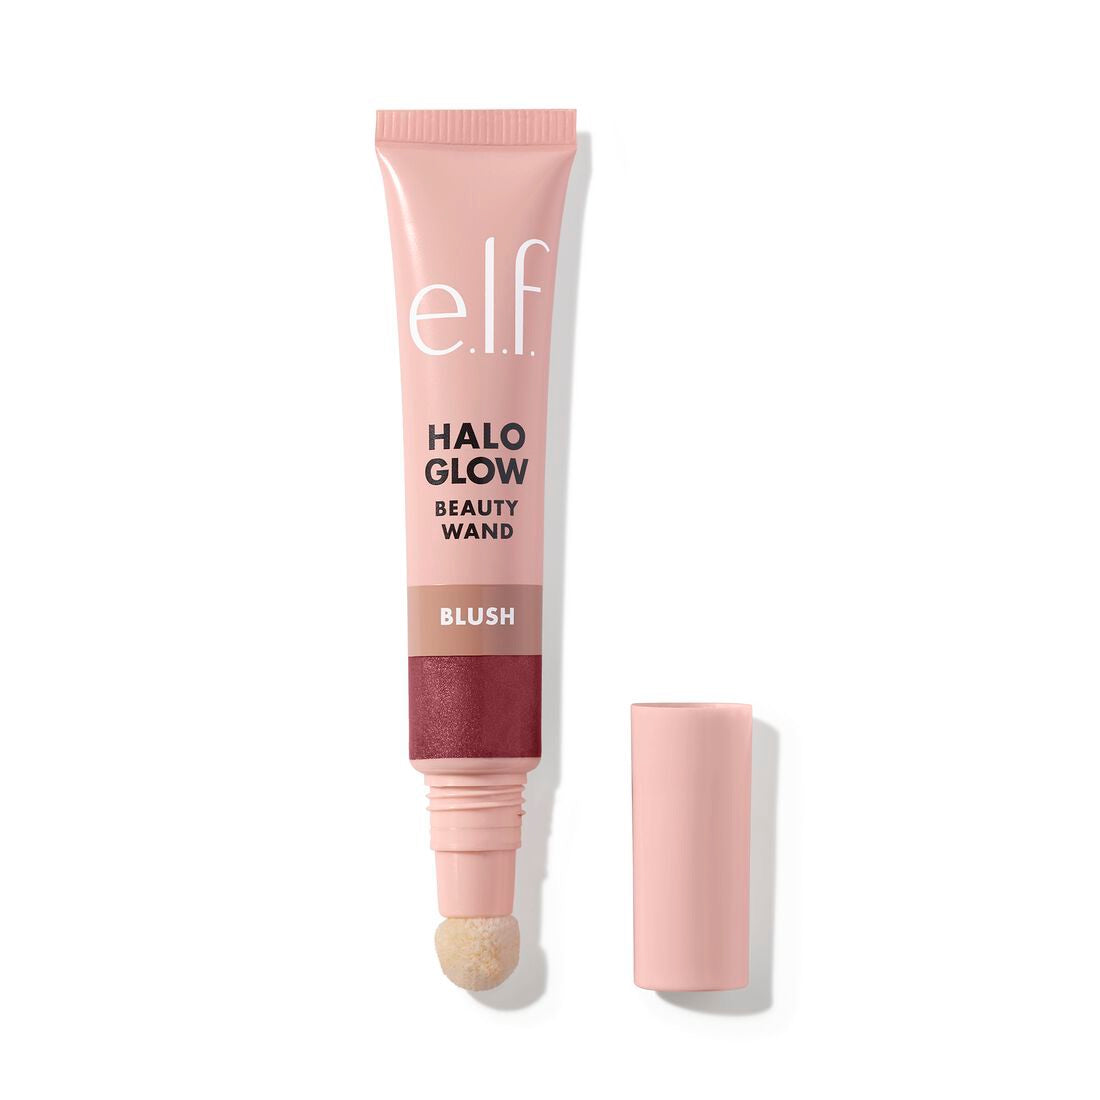 e.l.f. Halo Glow Blush Beauty Wand Liquid filter Volare Makeup Berry Radiant - Berry for Fair/Rich  